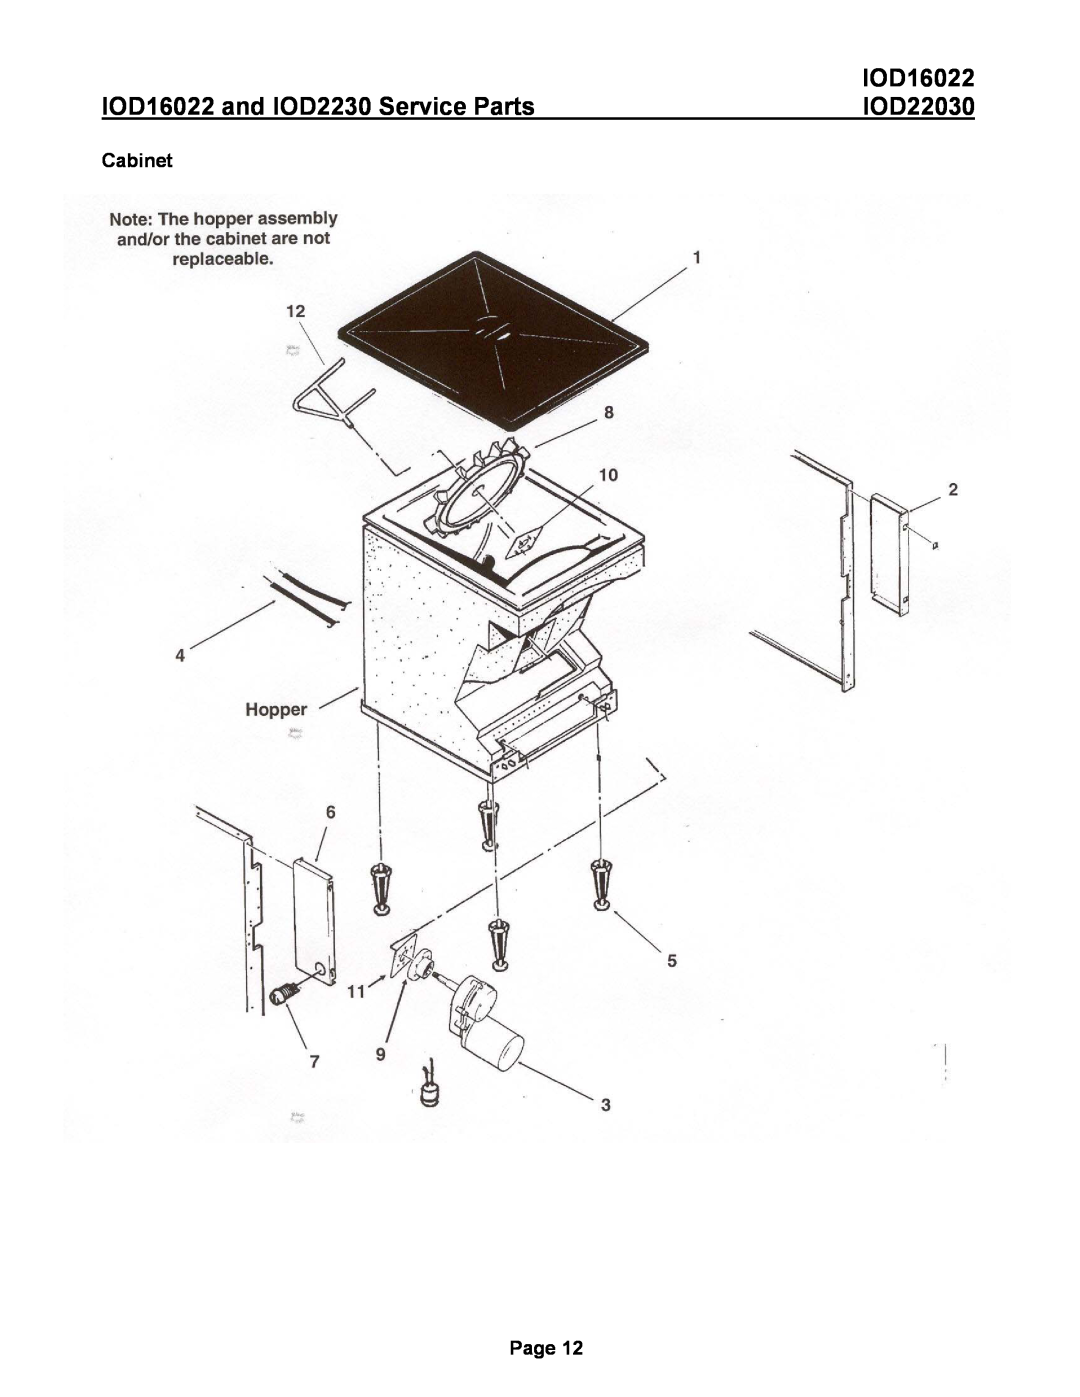 Ice-O-Matic IOD22030 manual Cabinet, IOD16022 and IOD2230 Service Parts, Page 